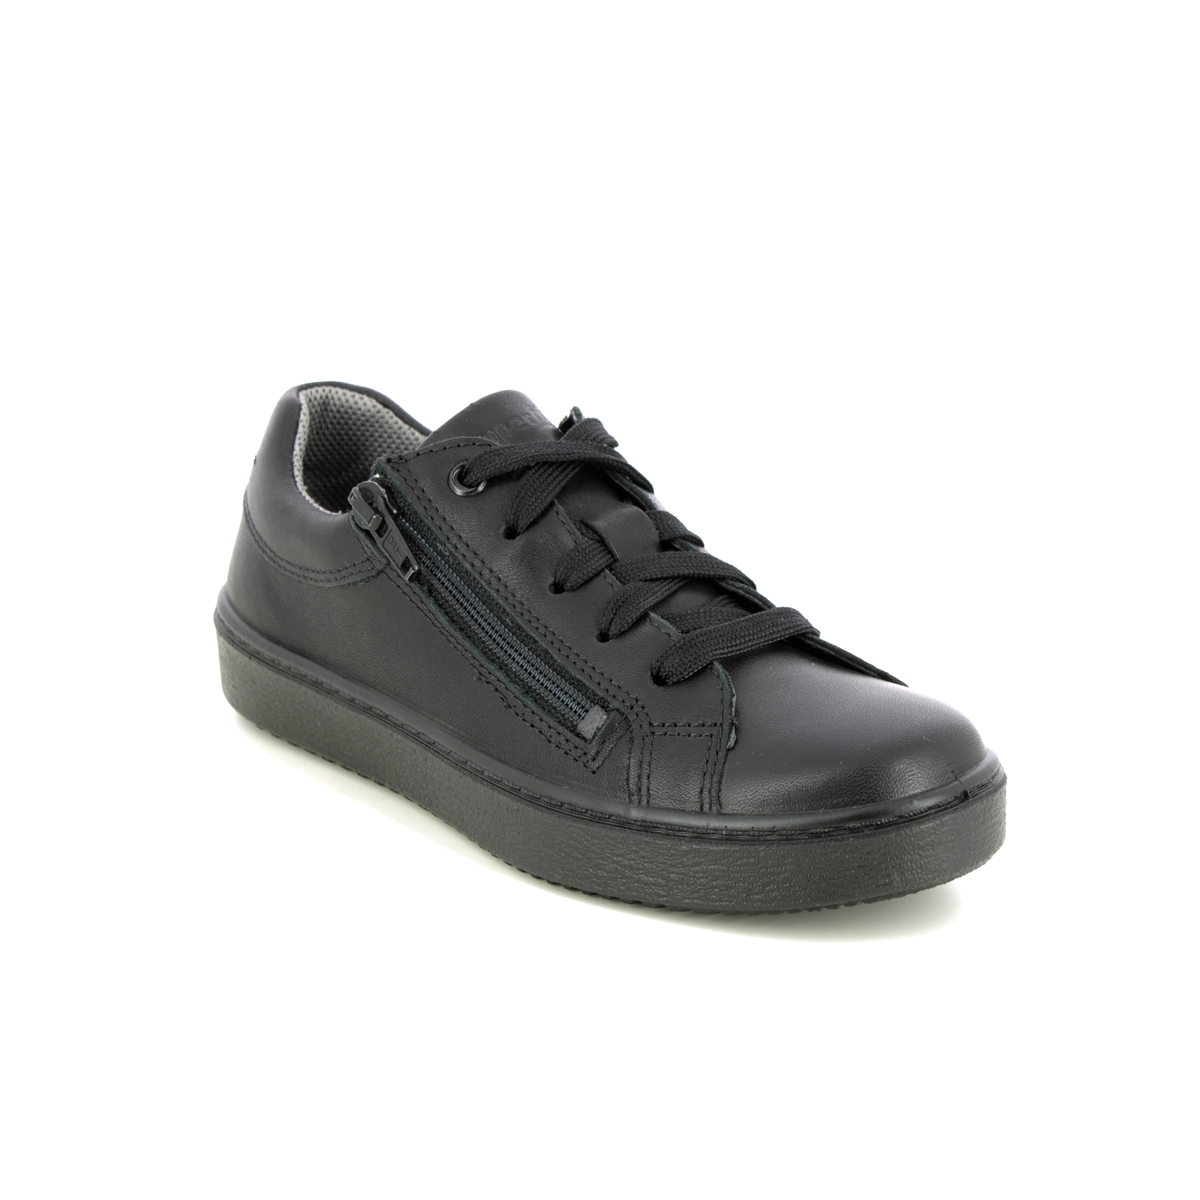 Superfit Heaven Zip Lace Black leather Kids Girls shoes 1006489-0000 in a Plain Leather in Size 37